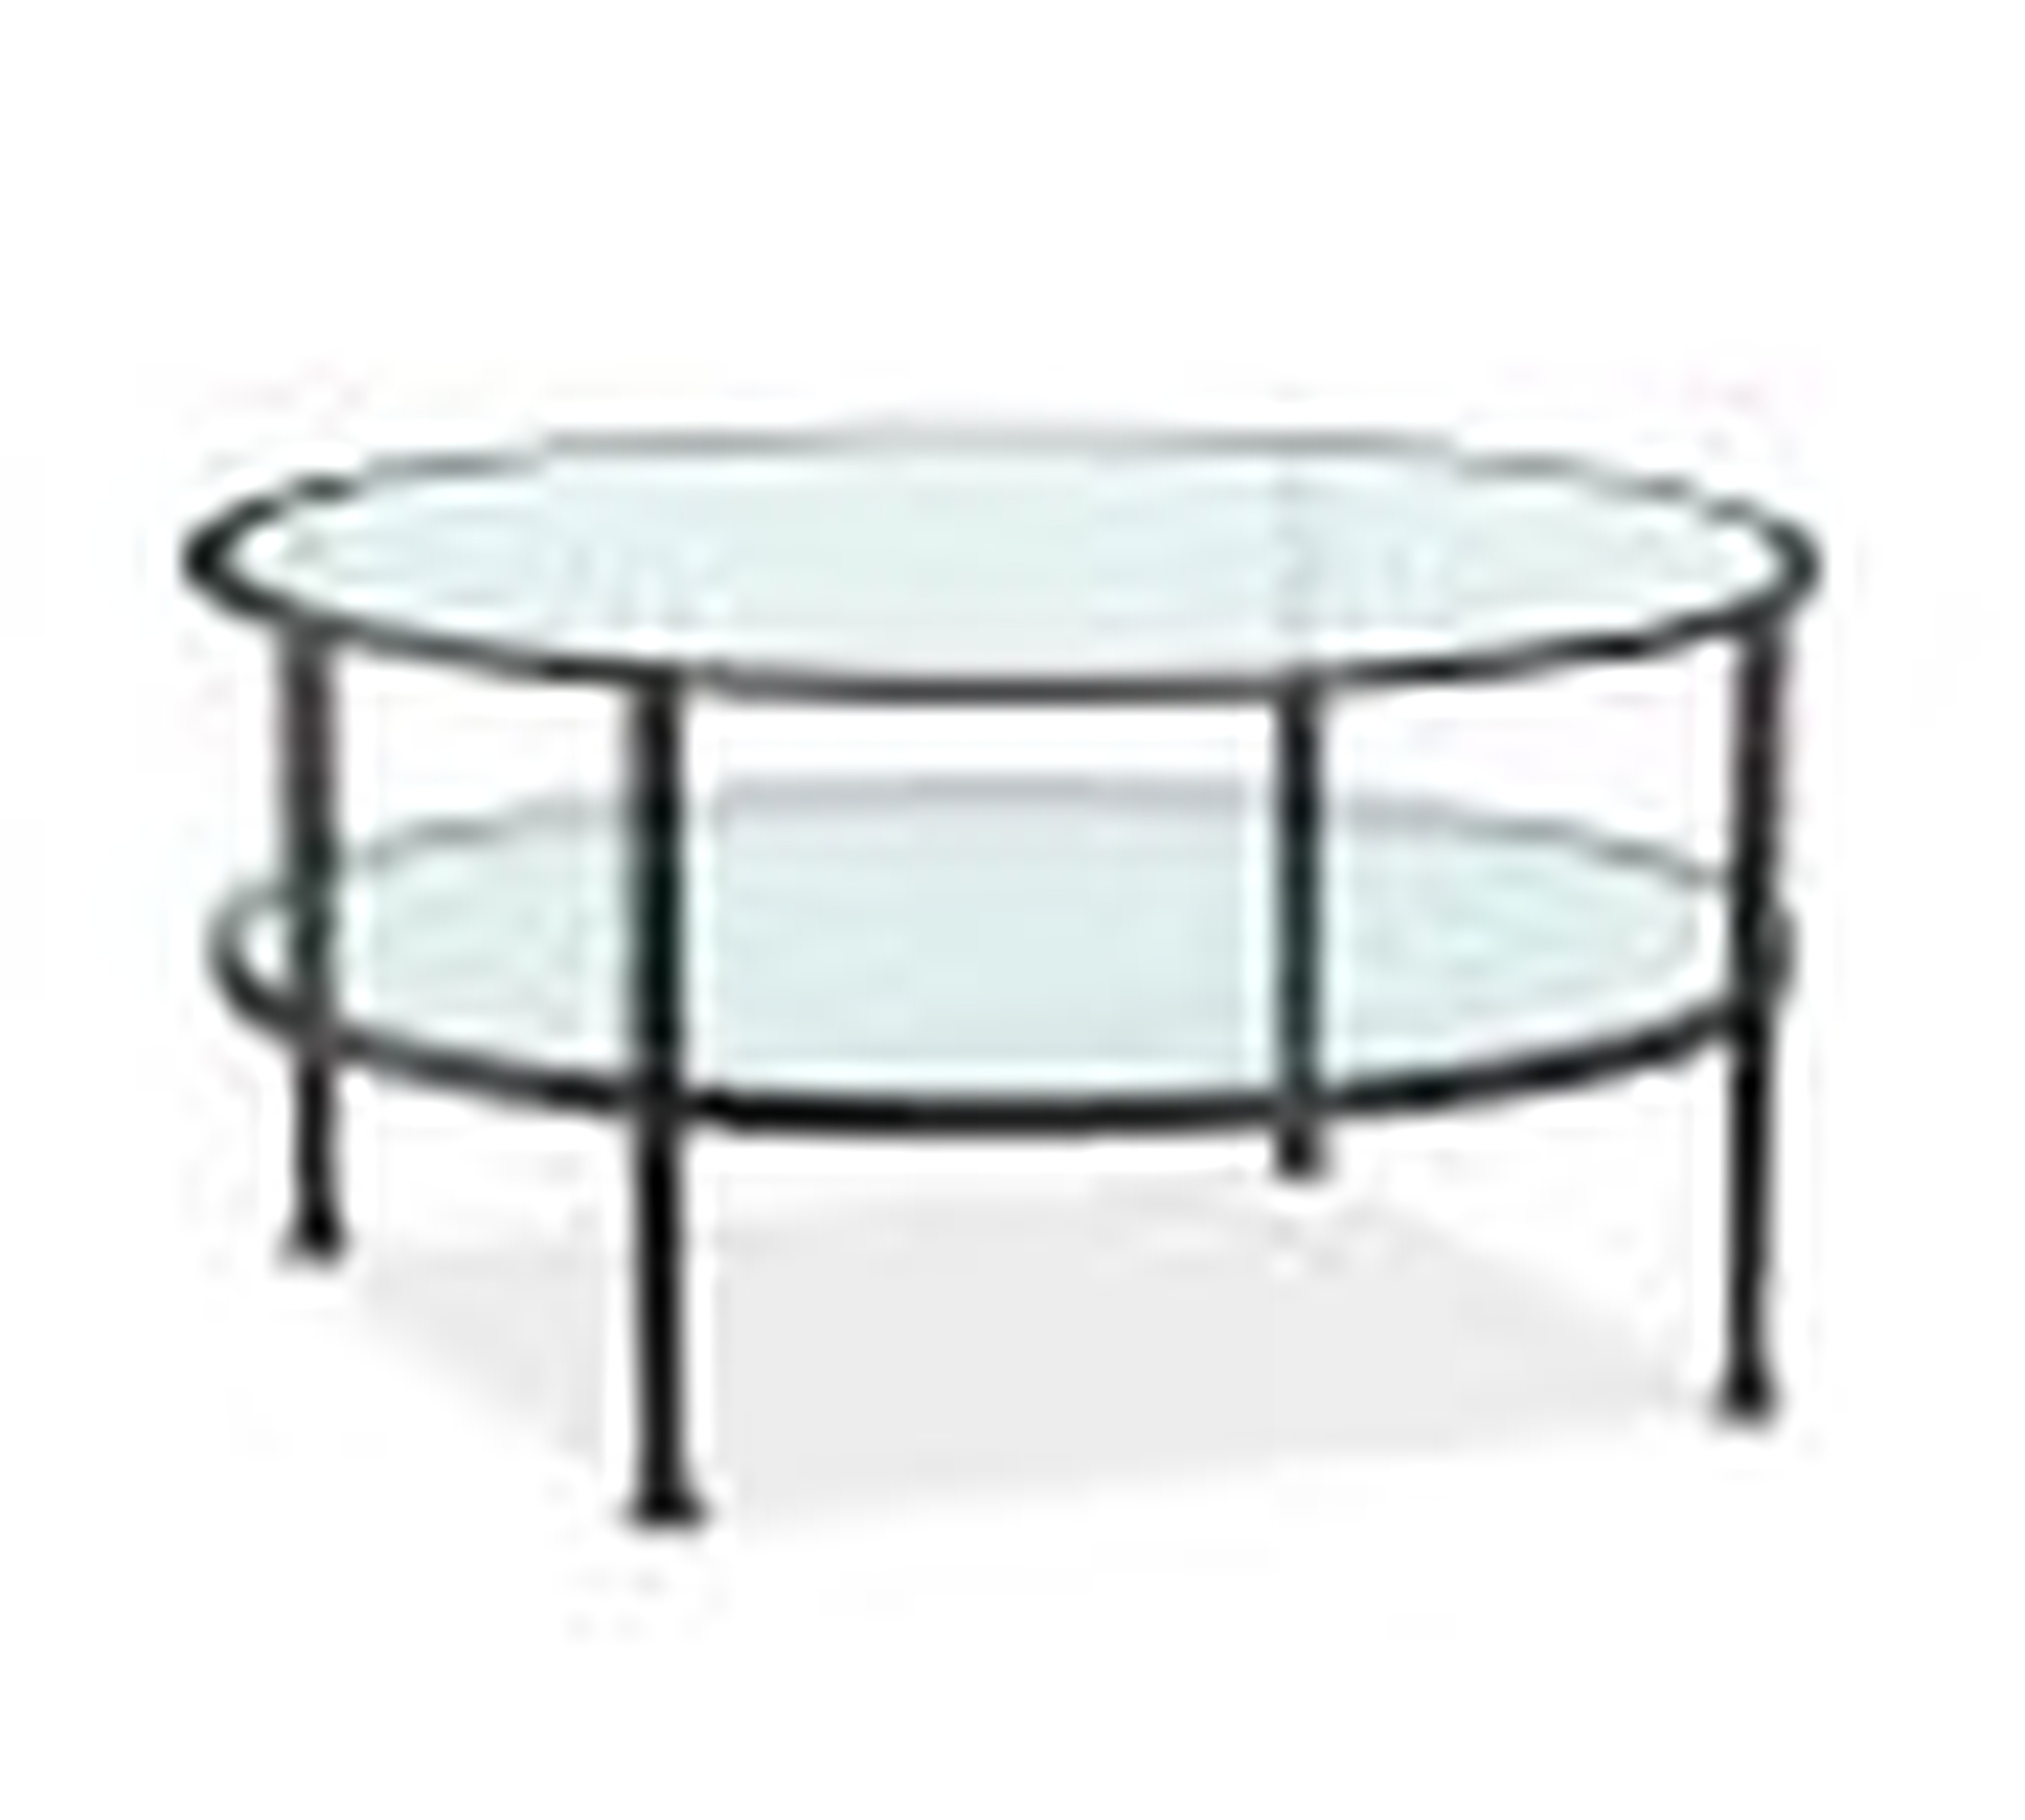 TANNER ROUND COFFEE TABLE - BRONZE FINISH - Pottery Barn